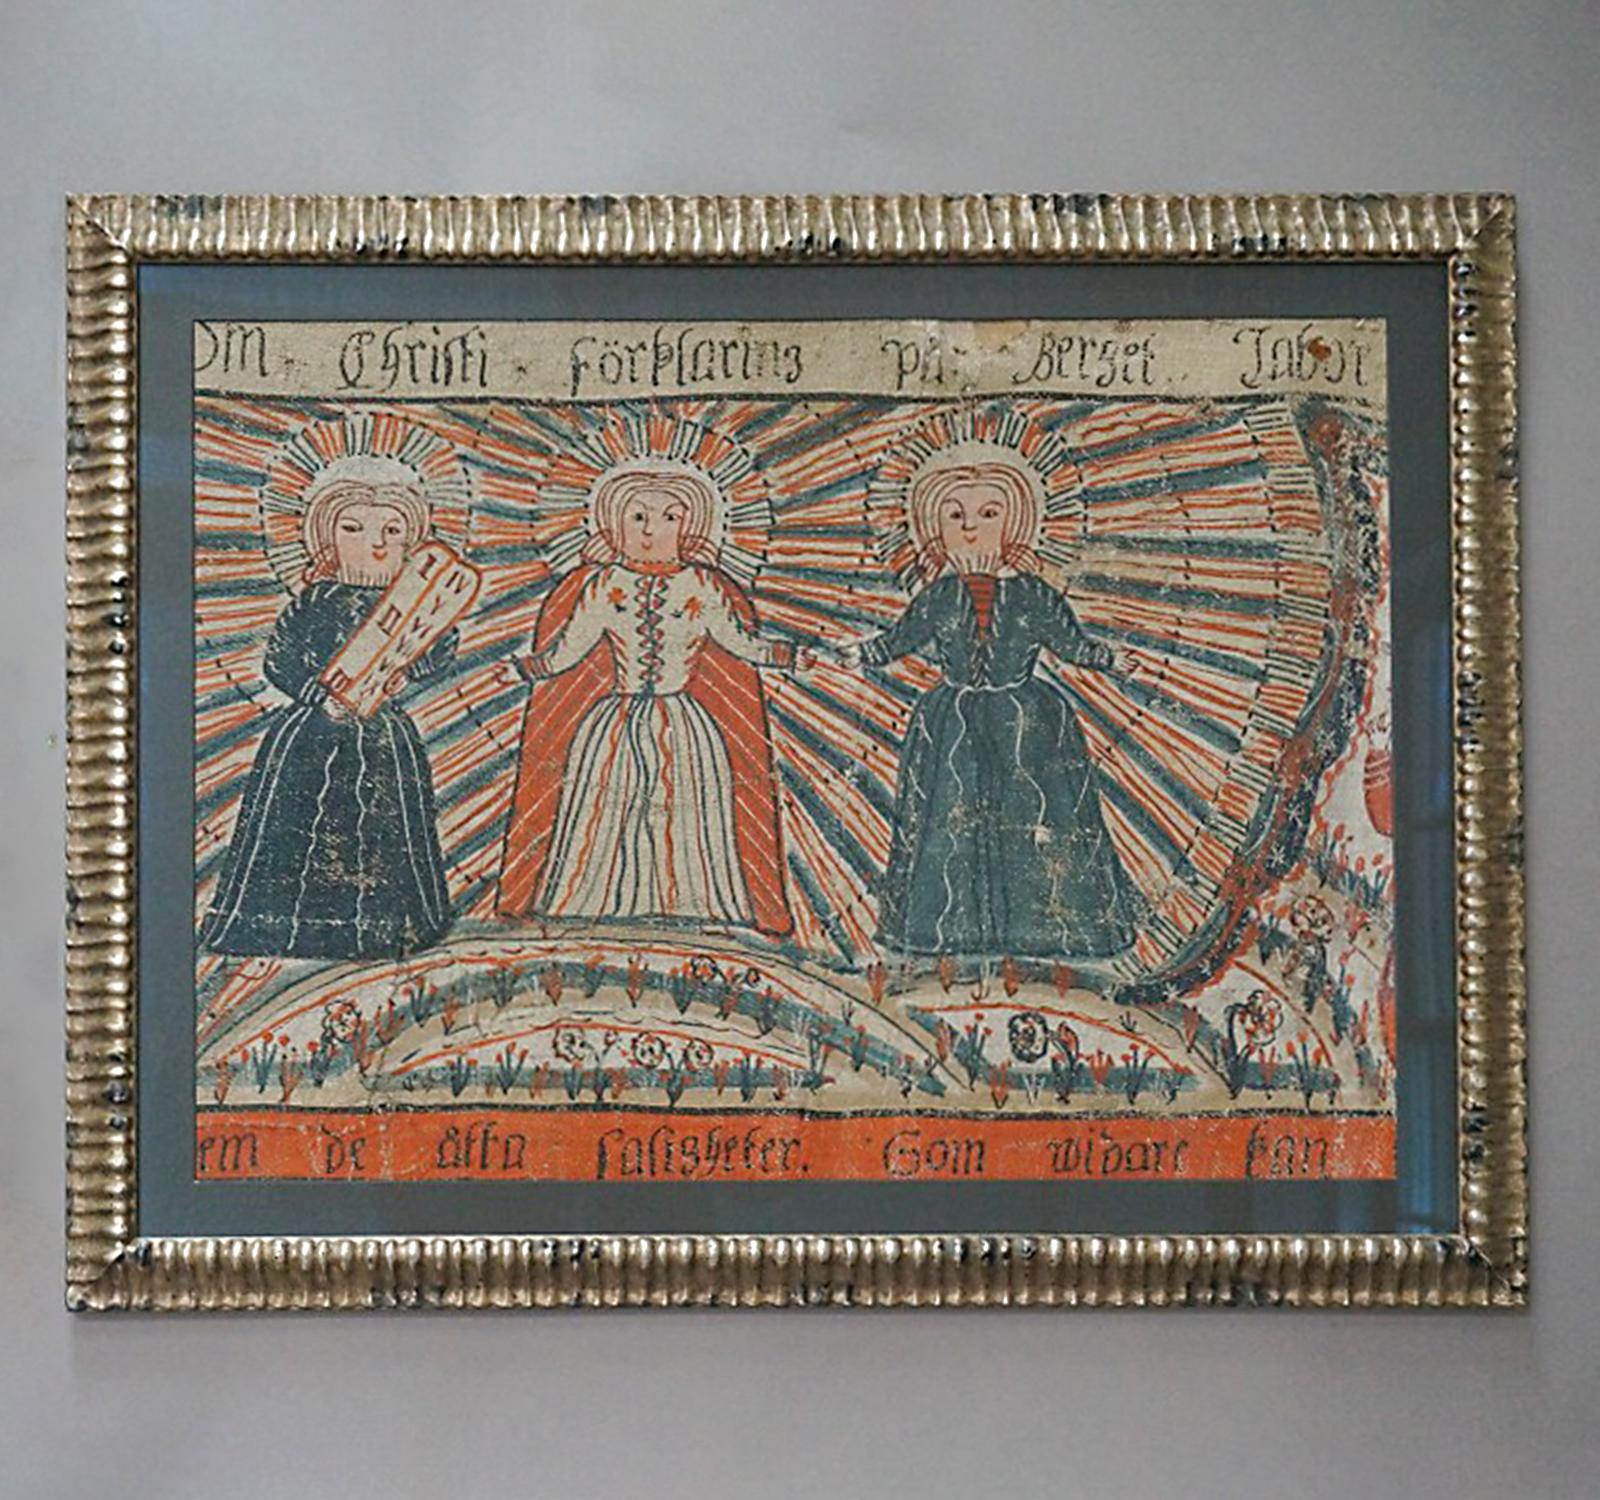 Fragment of larger Swedish bonad dated 1818 and illustrating the transfiguration of Jesus with Moses and Elijah on either side. We see the three men on a mountain top with the light of glory emanating from the central figure. Tempera on homespun